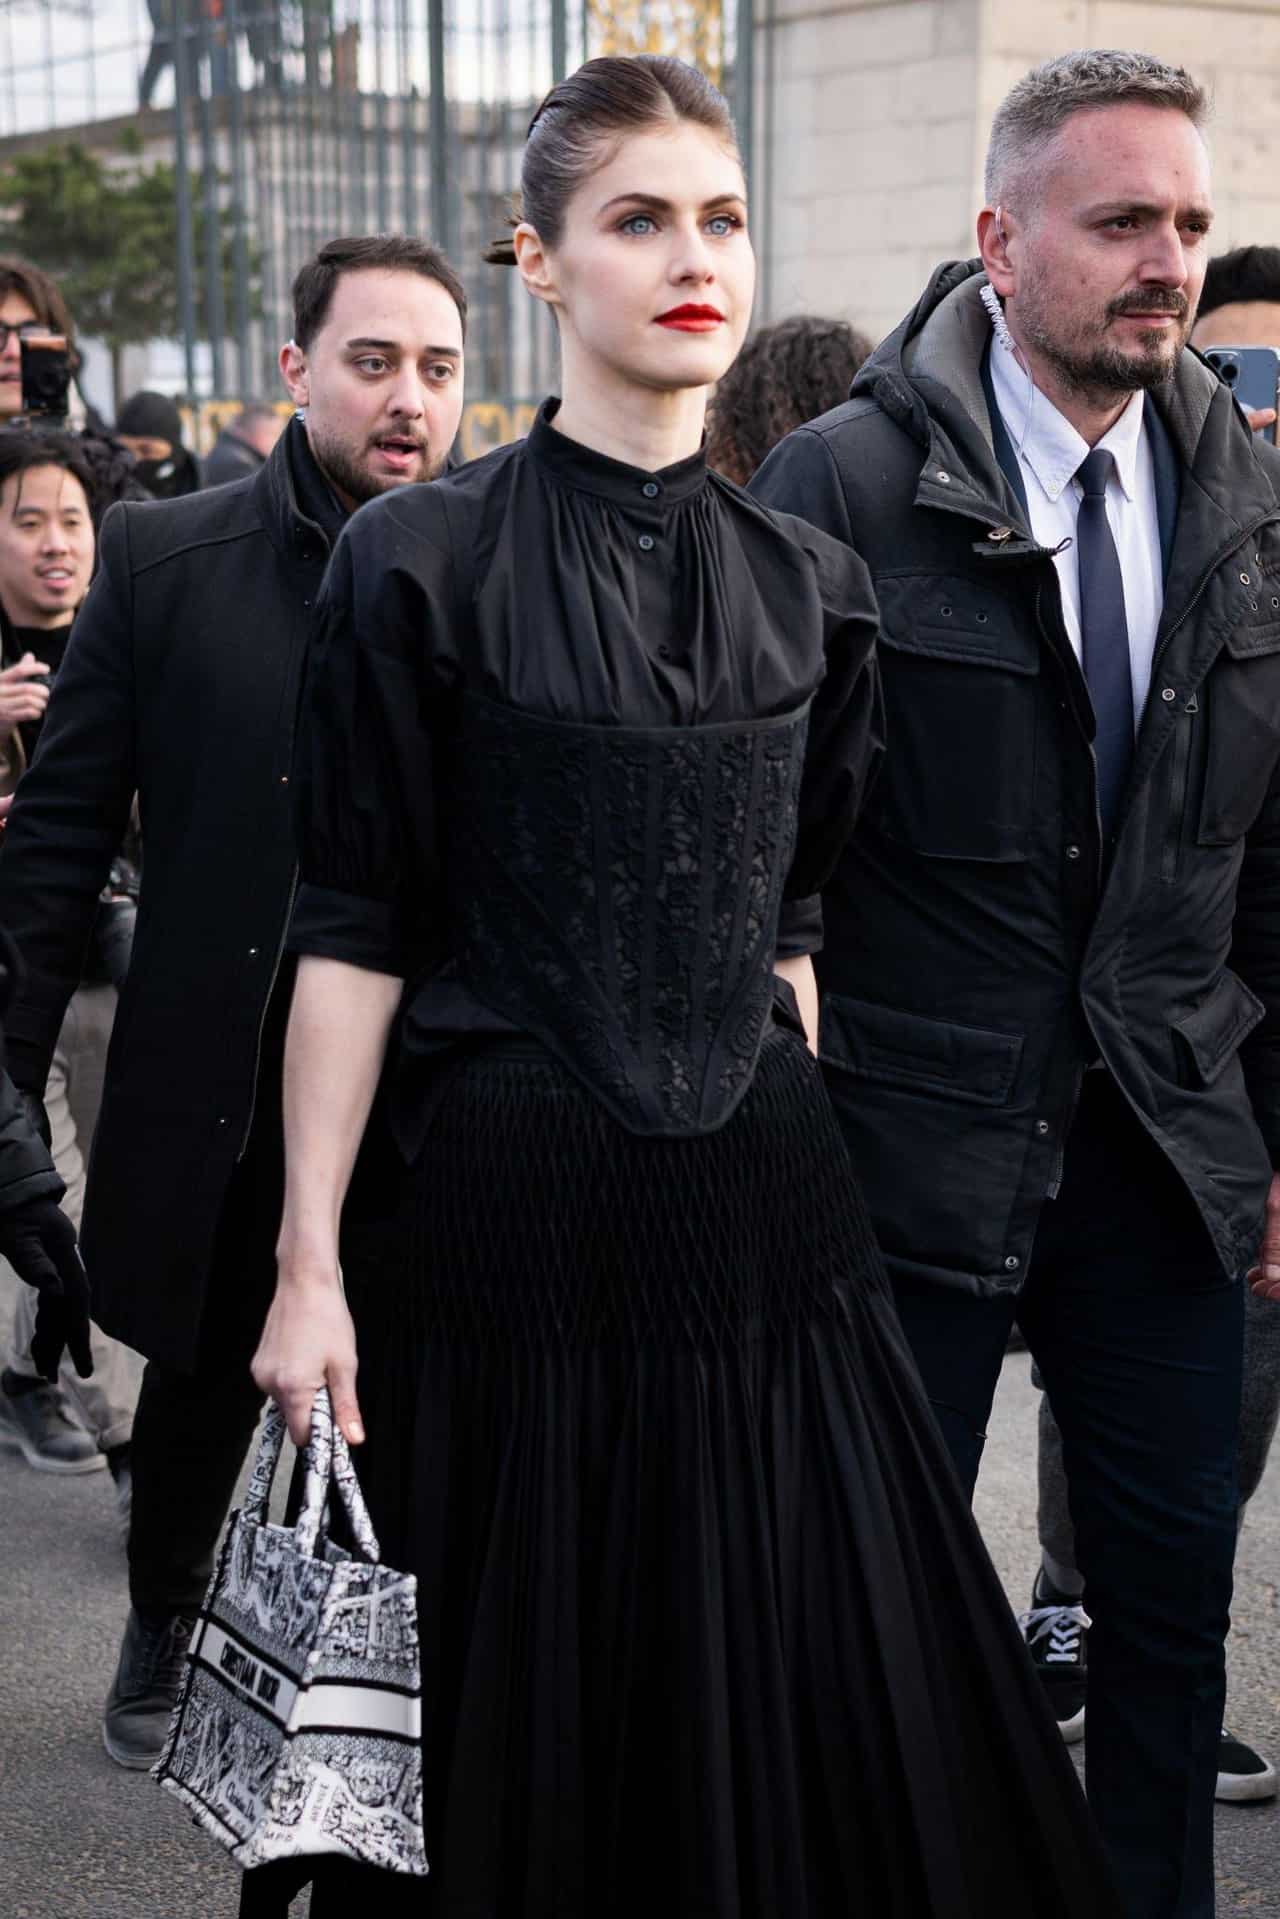 Alexandra Daddario in Gothic Dress Attends Dior’s Fall 2023 Show at PFW